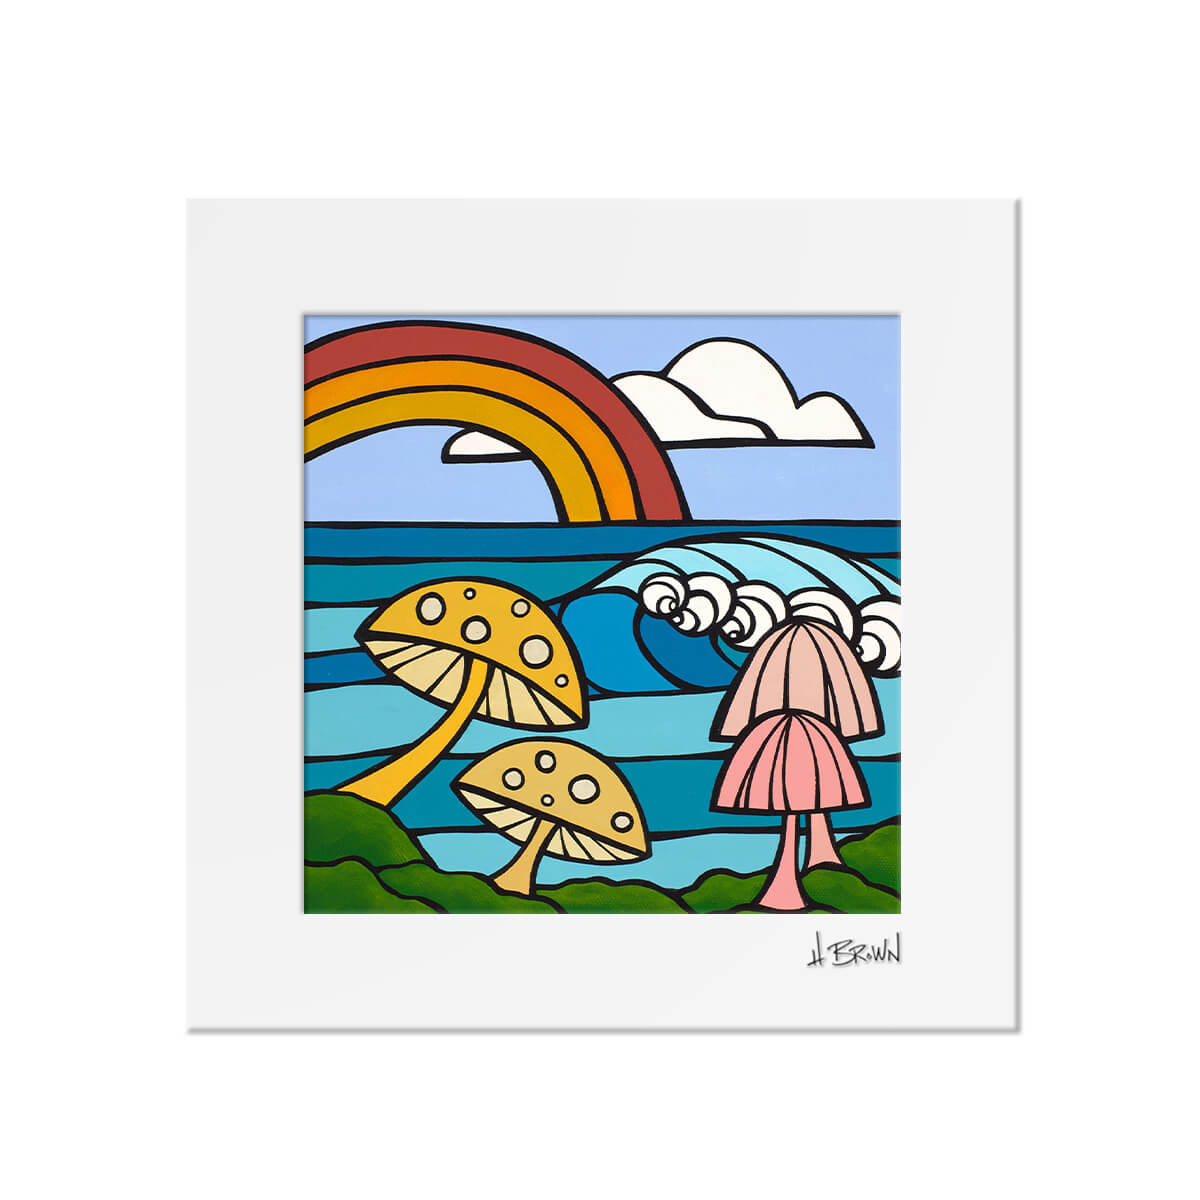 Sea shrooms and rainbow wave art matted print by Oahu artist Heather Brown